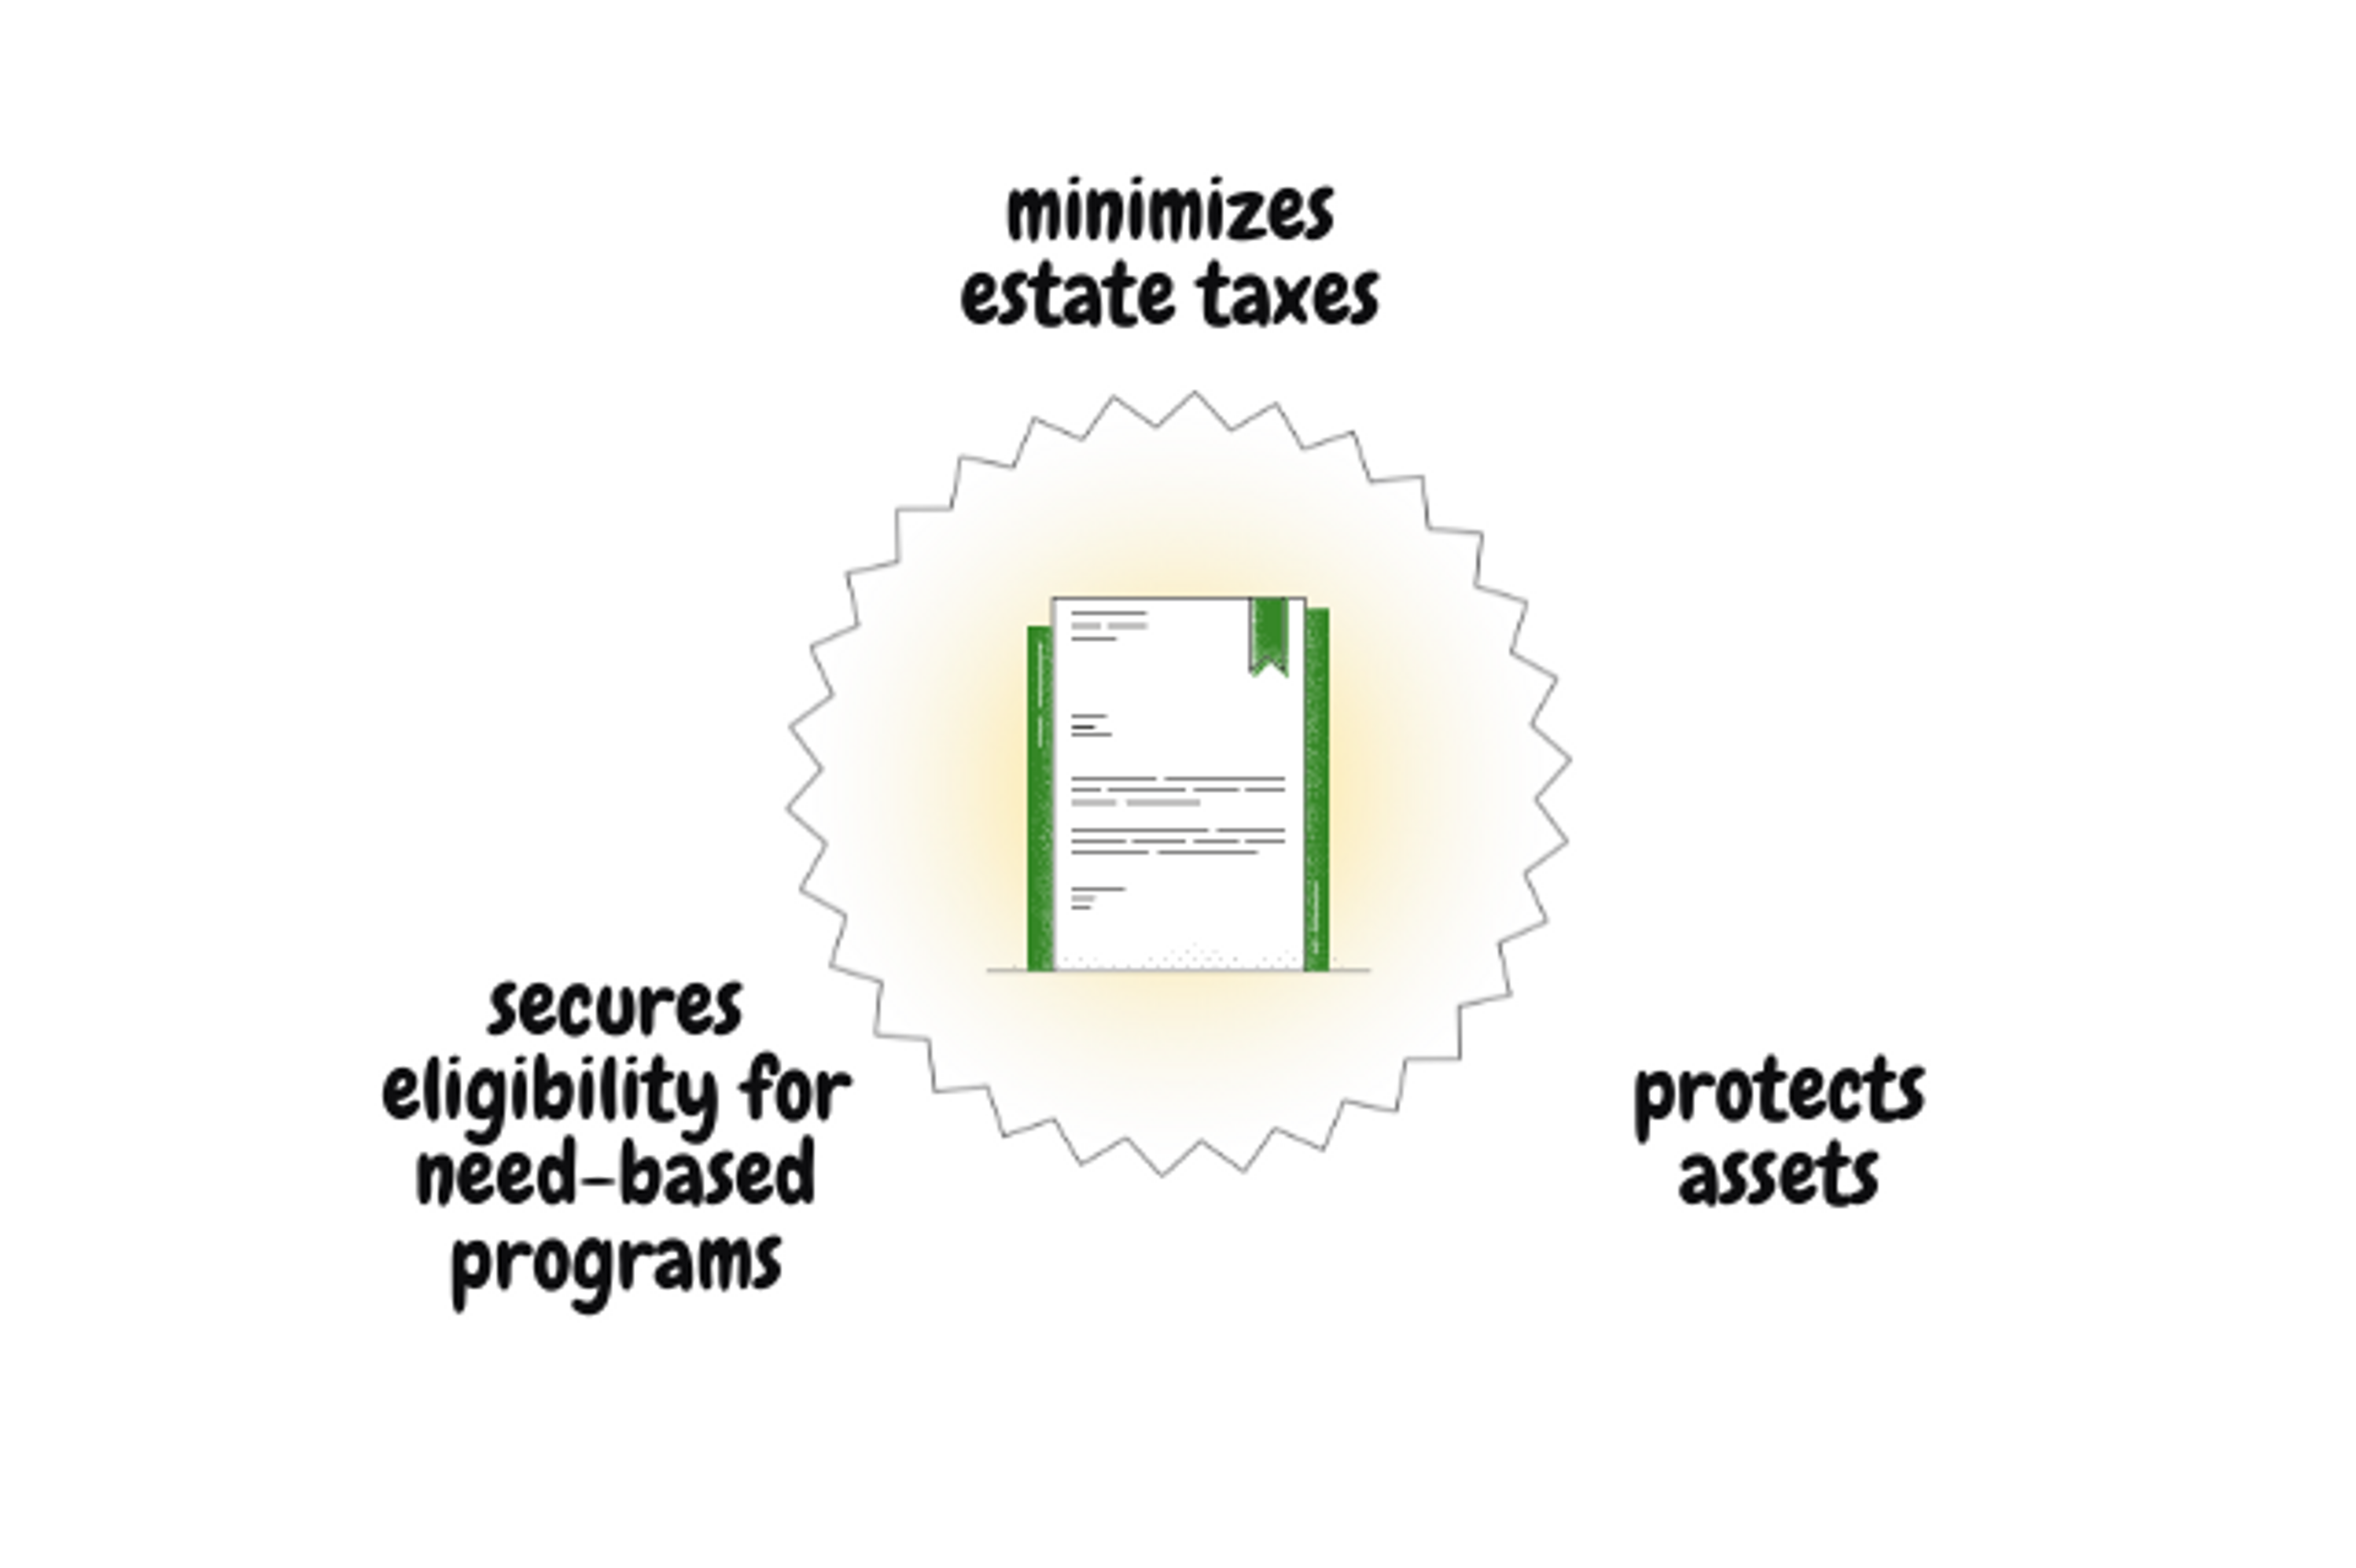 graphic showing the advantages of an irrevocable trust to minimize estate taxes, secure eligibility for need-based programs, and protect assets